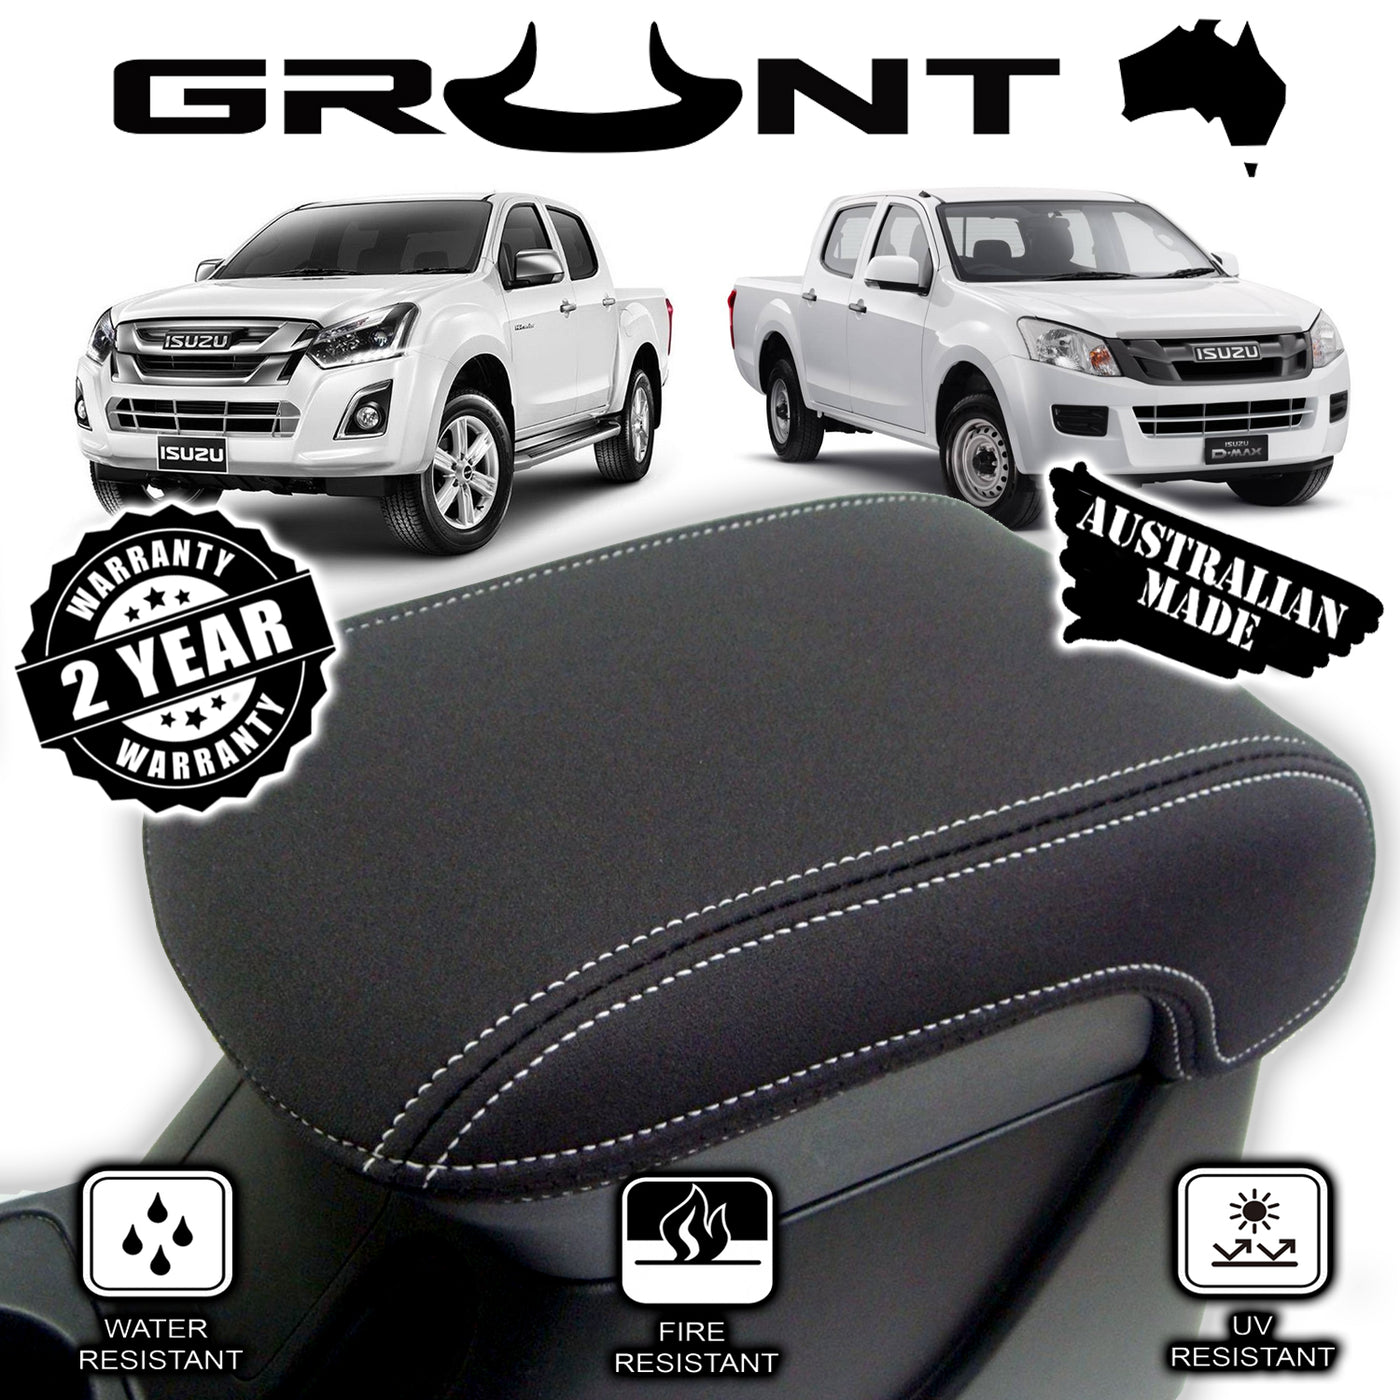 Grunt 4x4 neoprene centre console lid cover wetsuit for Isuzu D-Max 2012-2019